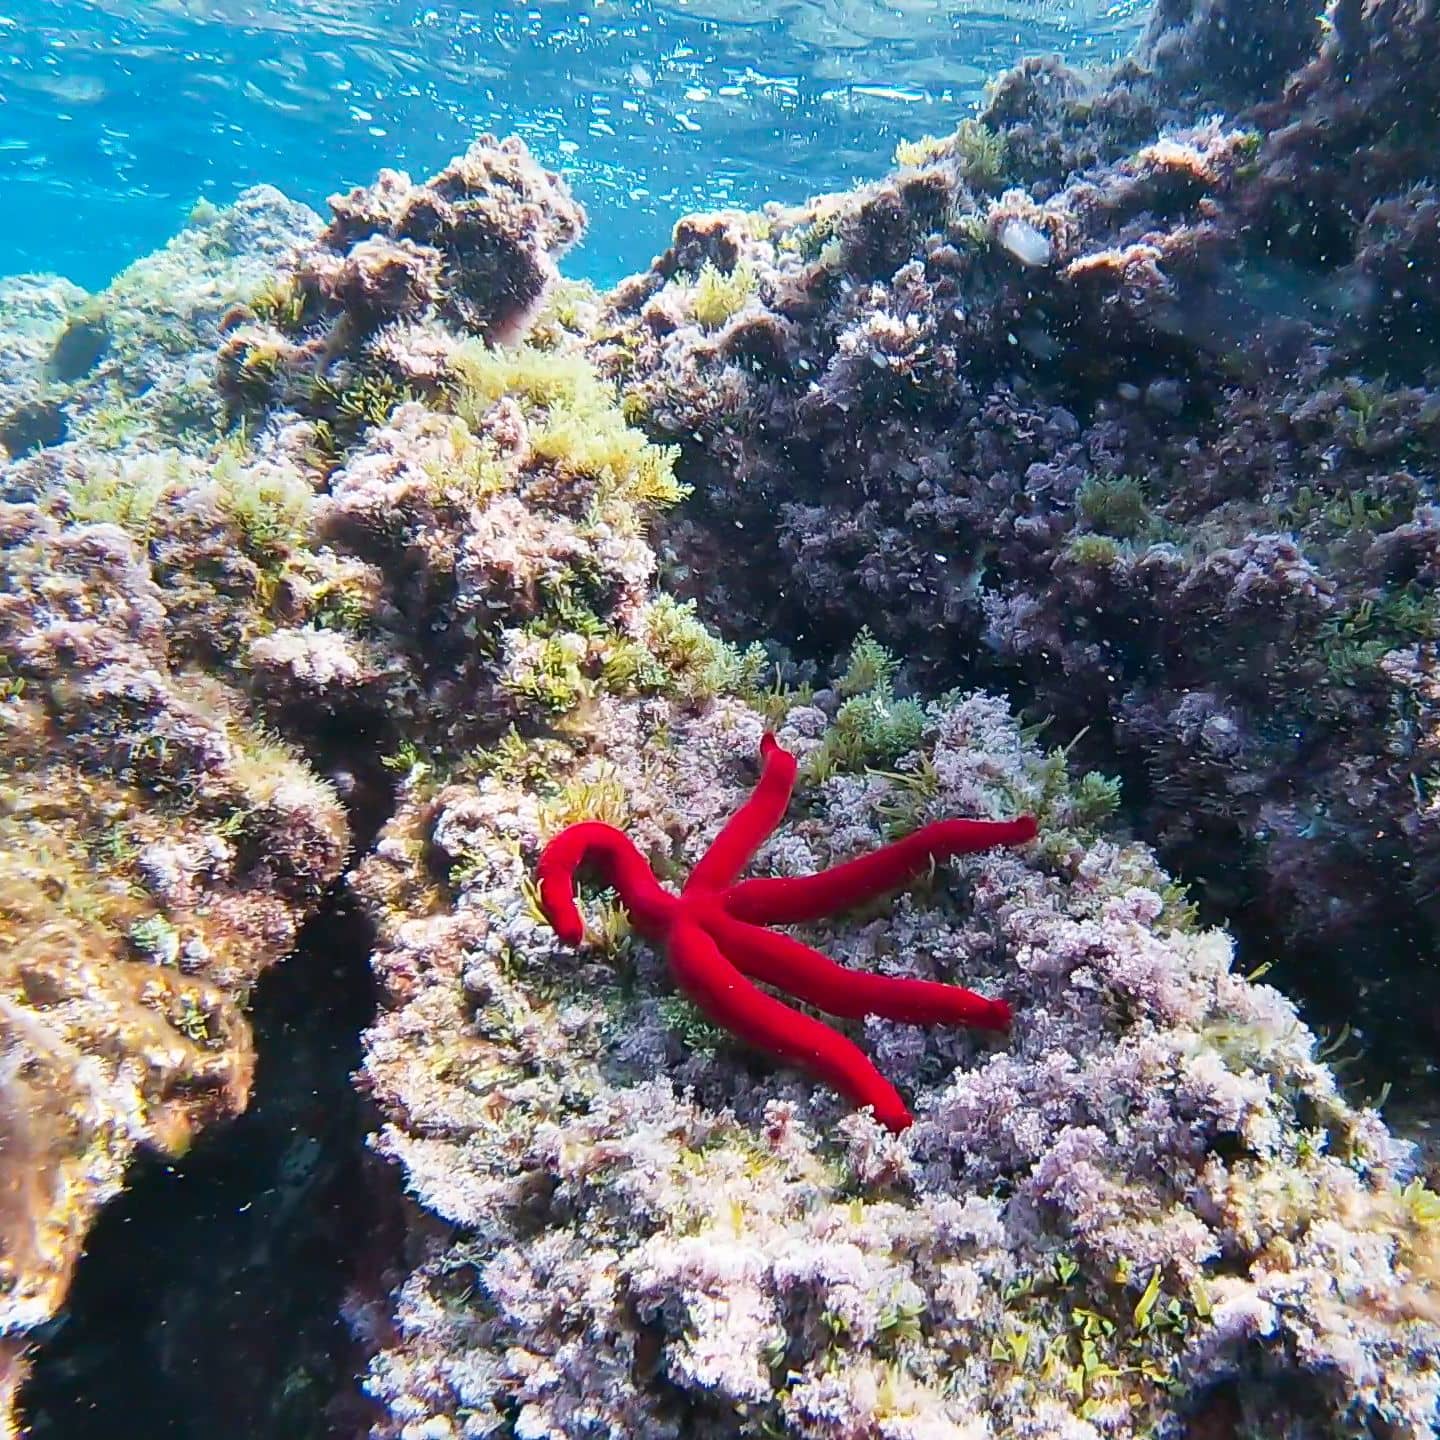 Winter snorkelling in Ibiza offers a beautiful mediterranean red star